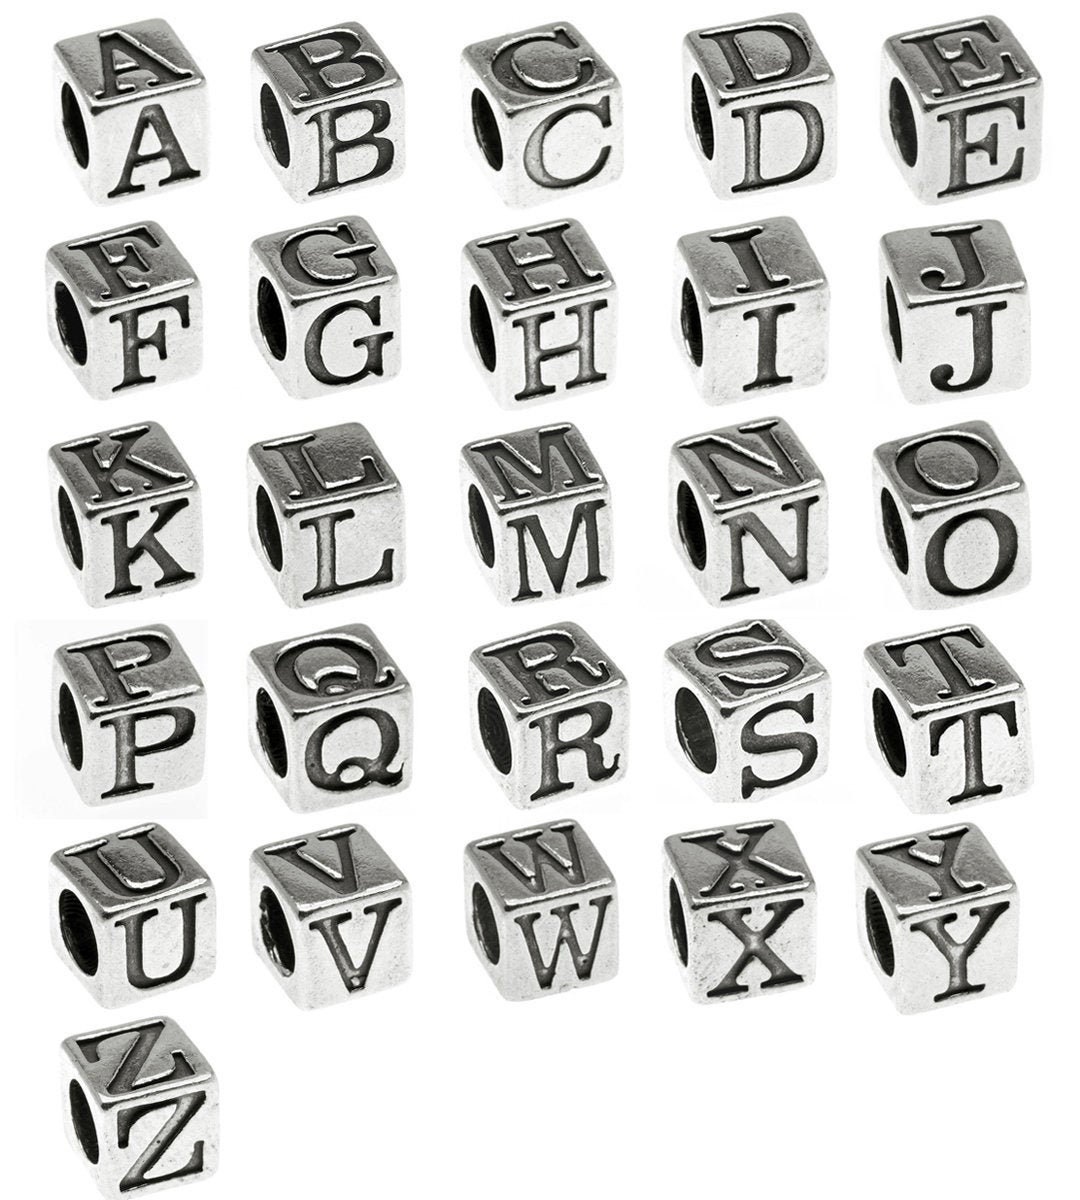 1 Any Sterling Silver Letter Beads 4.5mm of Your Choice by TIJC SS45 